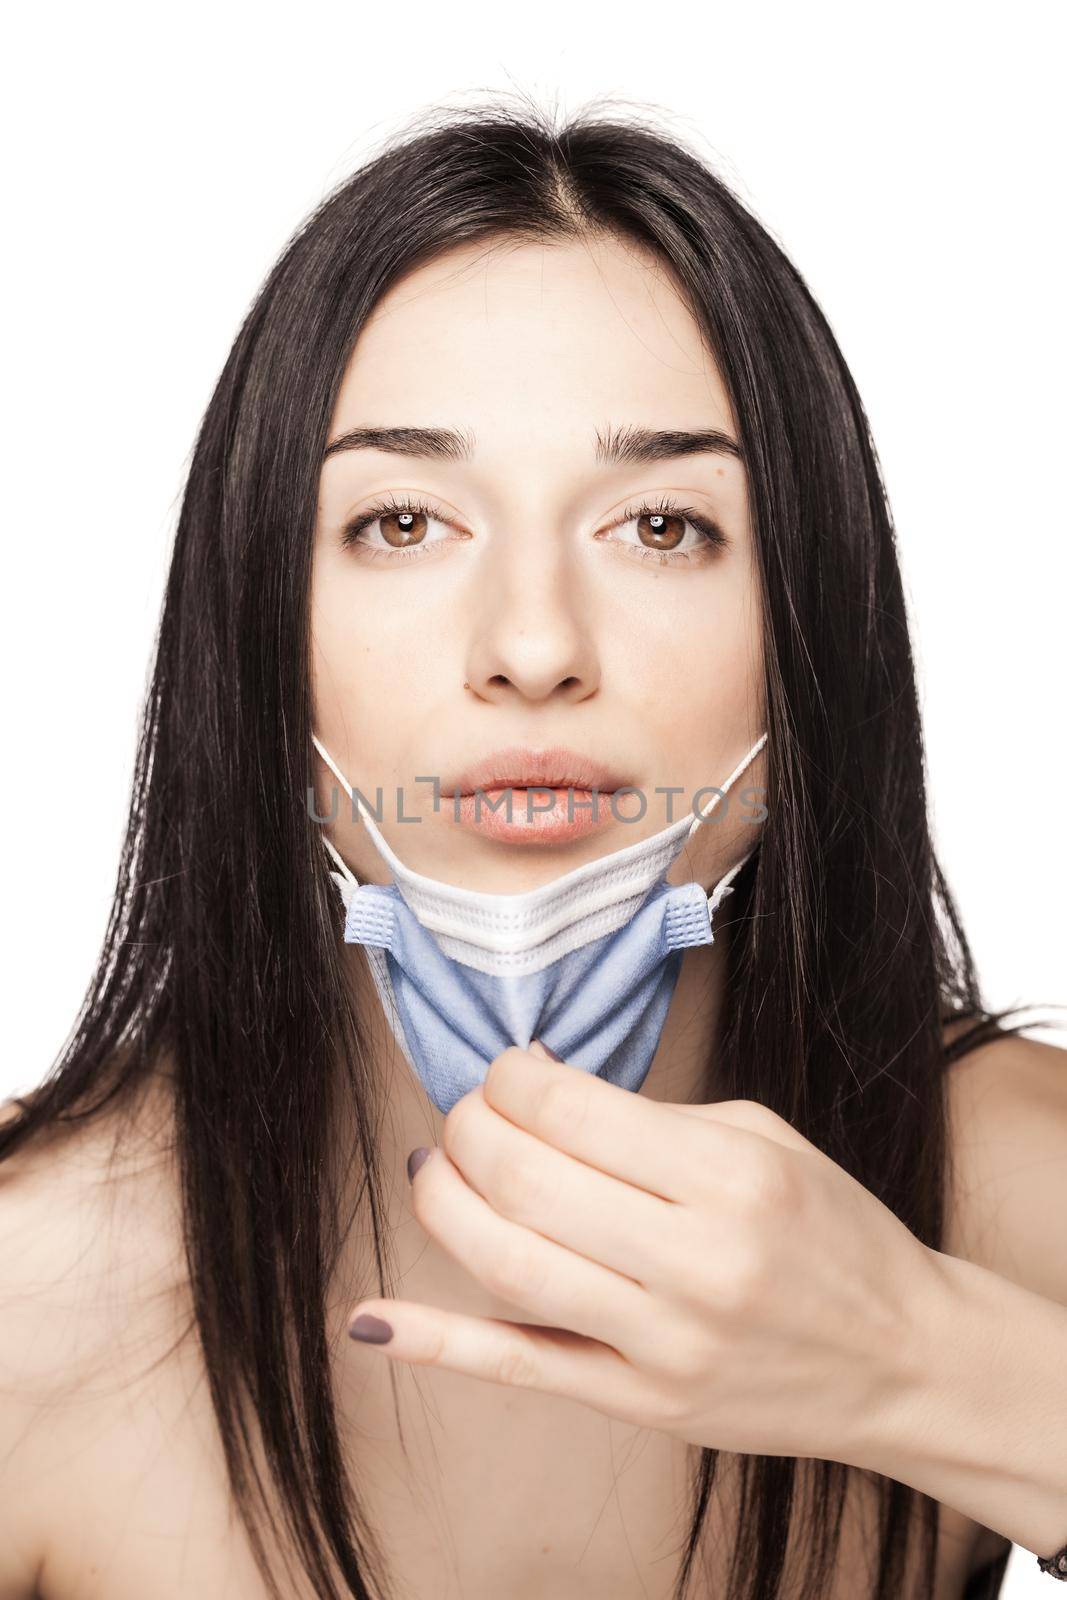 Serious looking girl pulling away medical face mask. Portrait against white background.